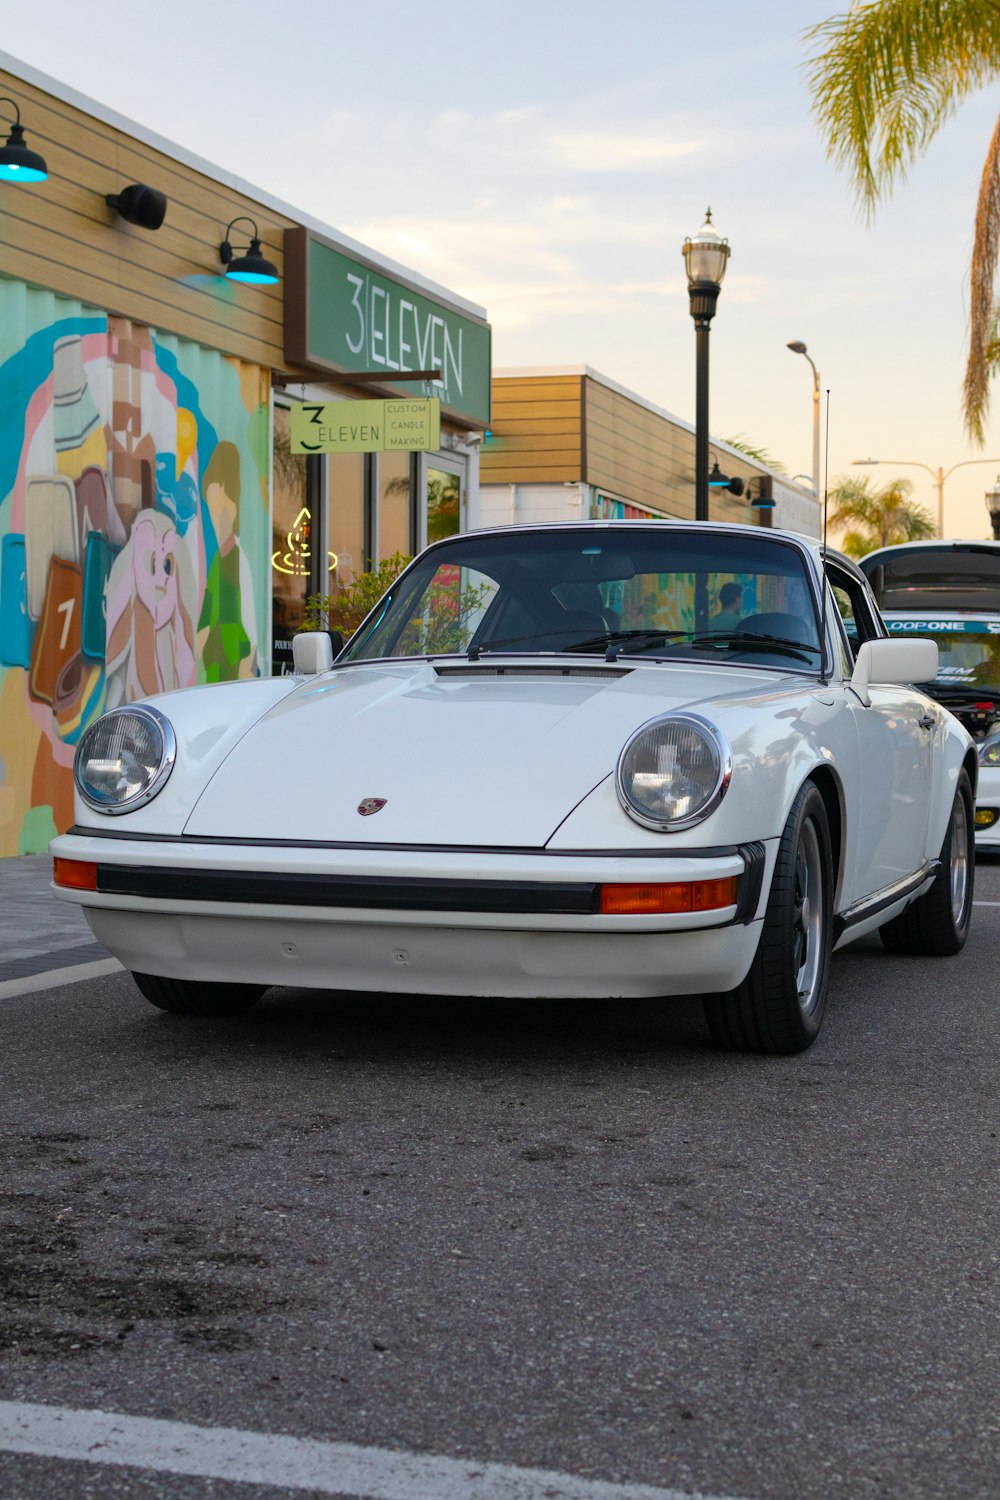 a white porsche parked in front of a store